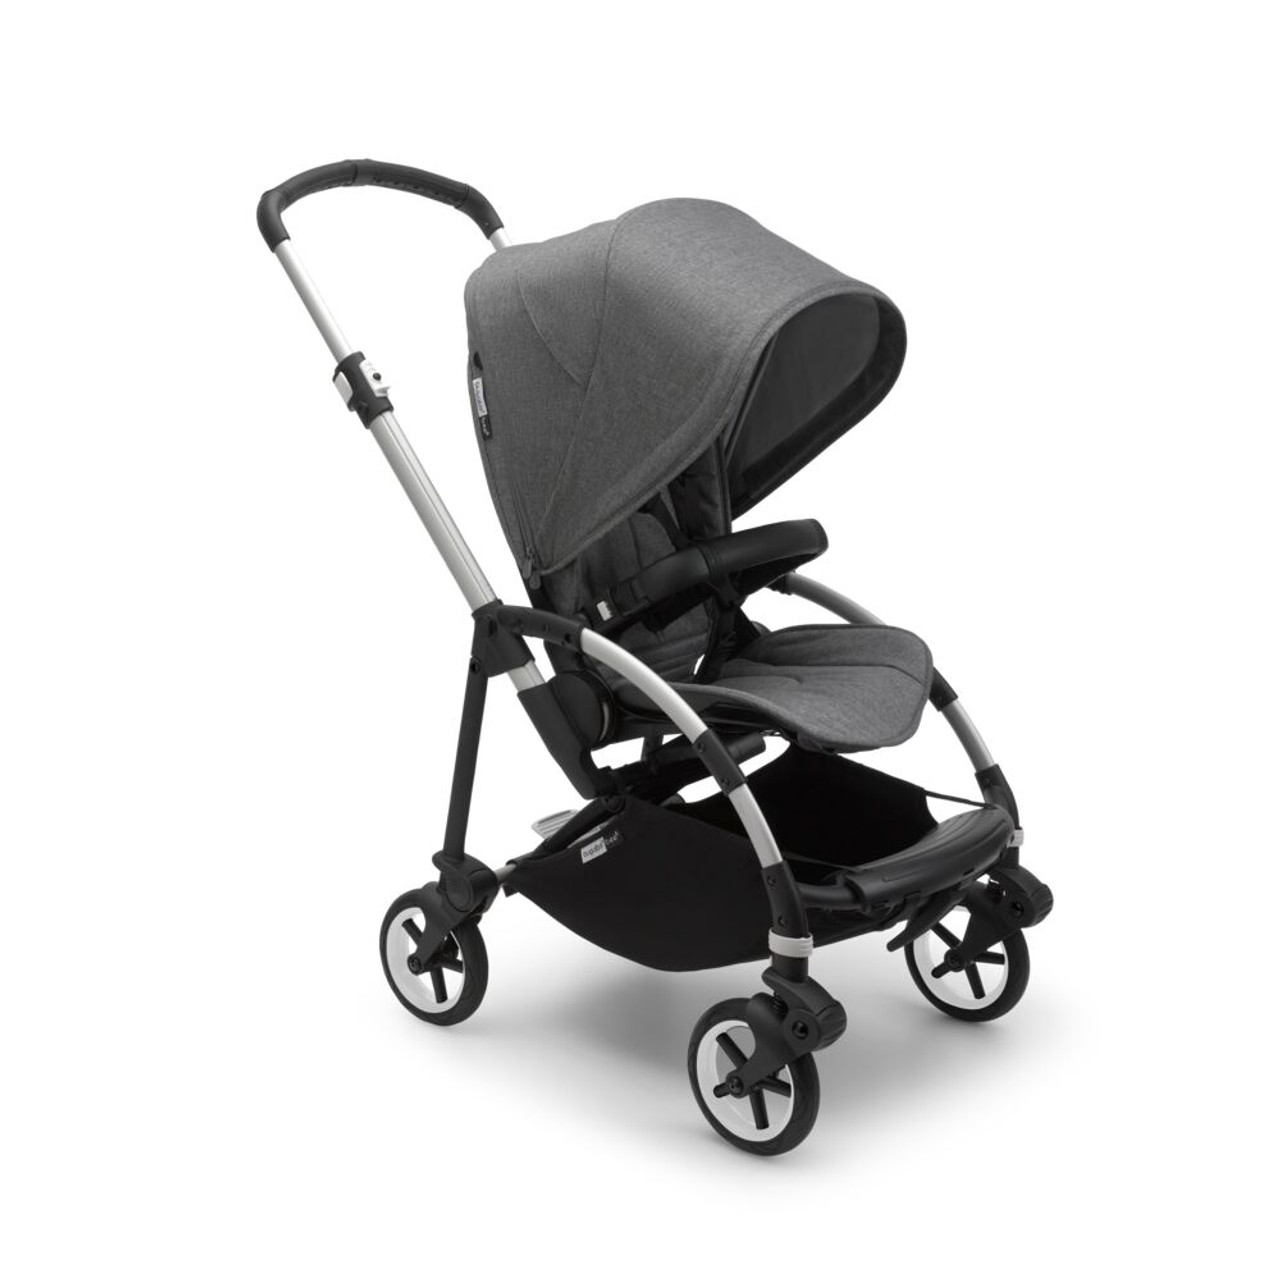 Bugaboo Bee6 Carrycot Newborn for Bee Pram in Grey Melange WITHOUT ADAPTERS